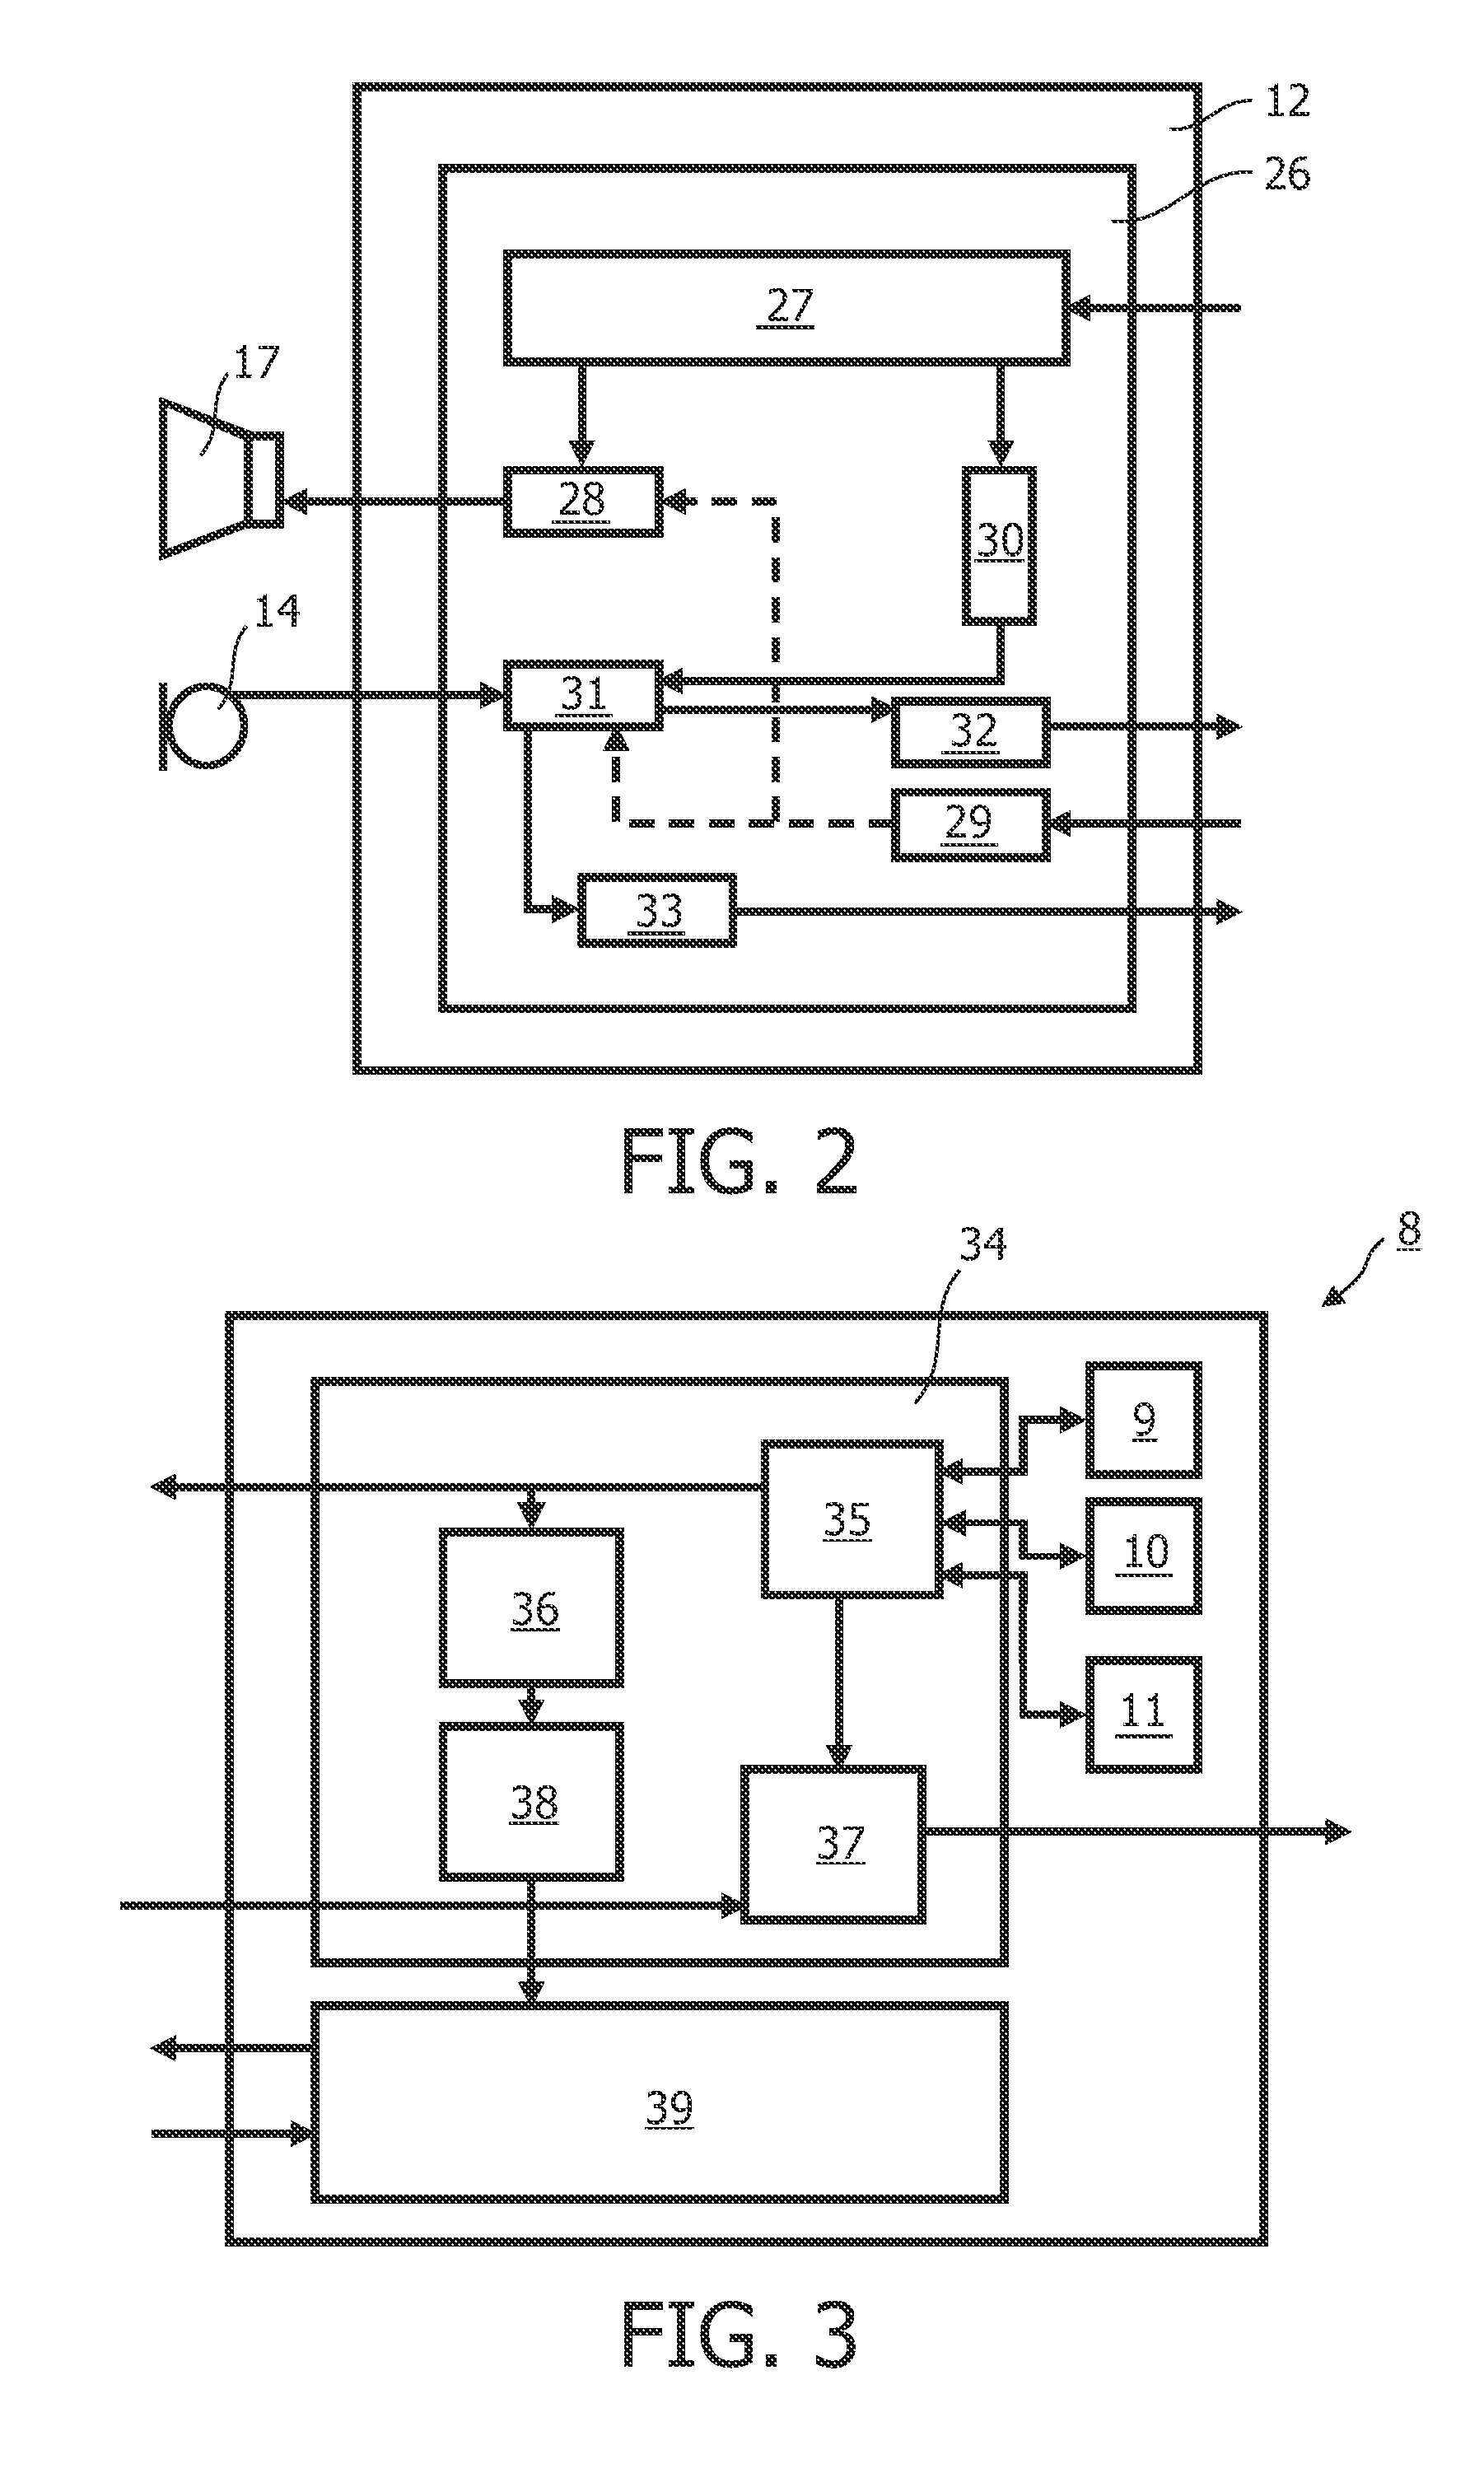 Method of controlling a system and signal processing system